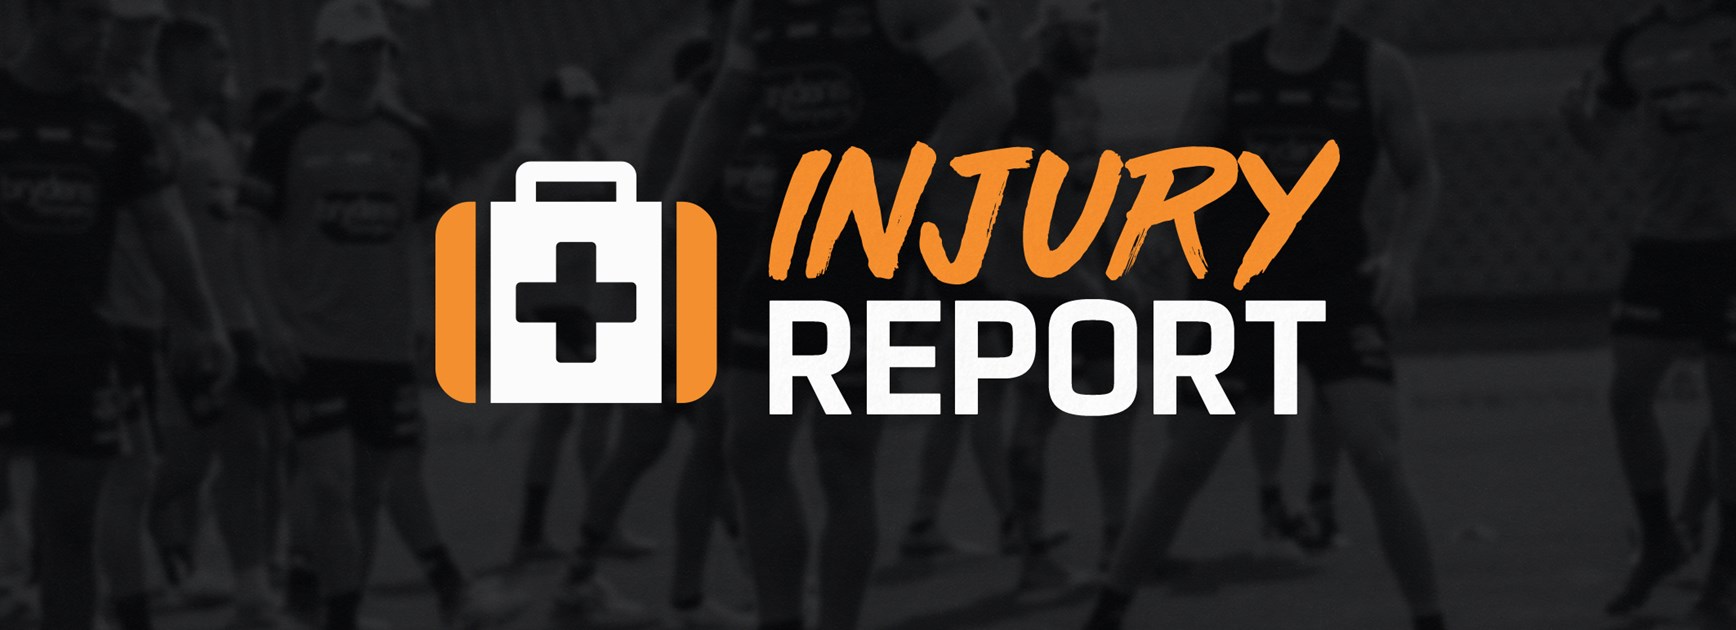 Injury Update: Players returning as 2020 season approaches